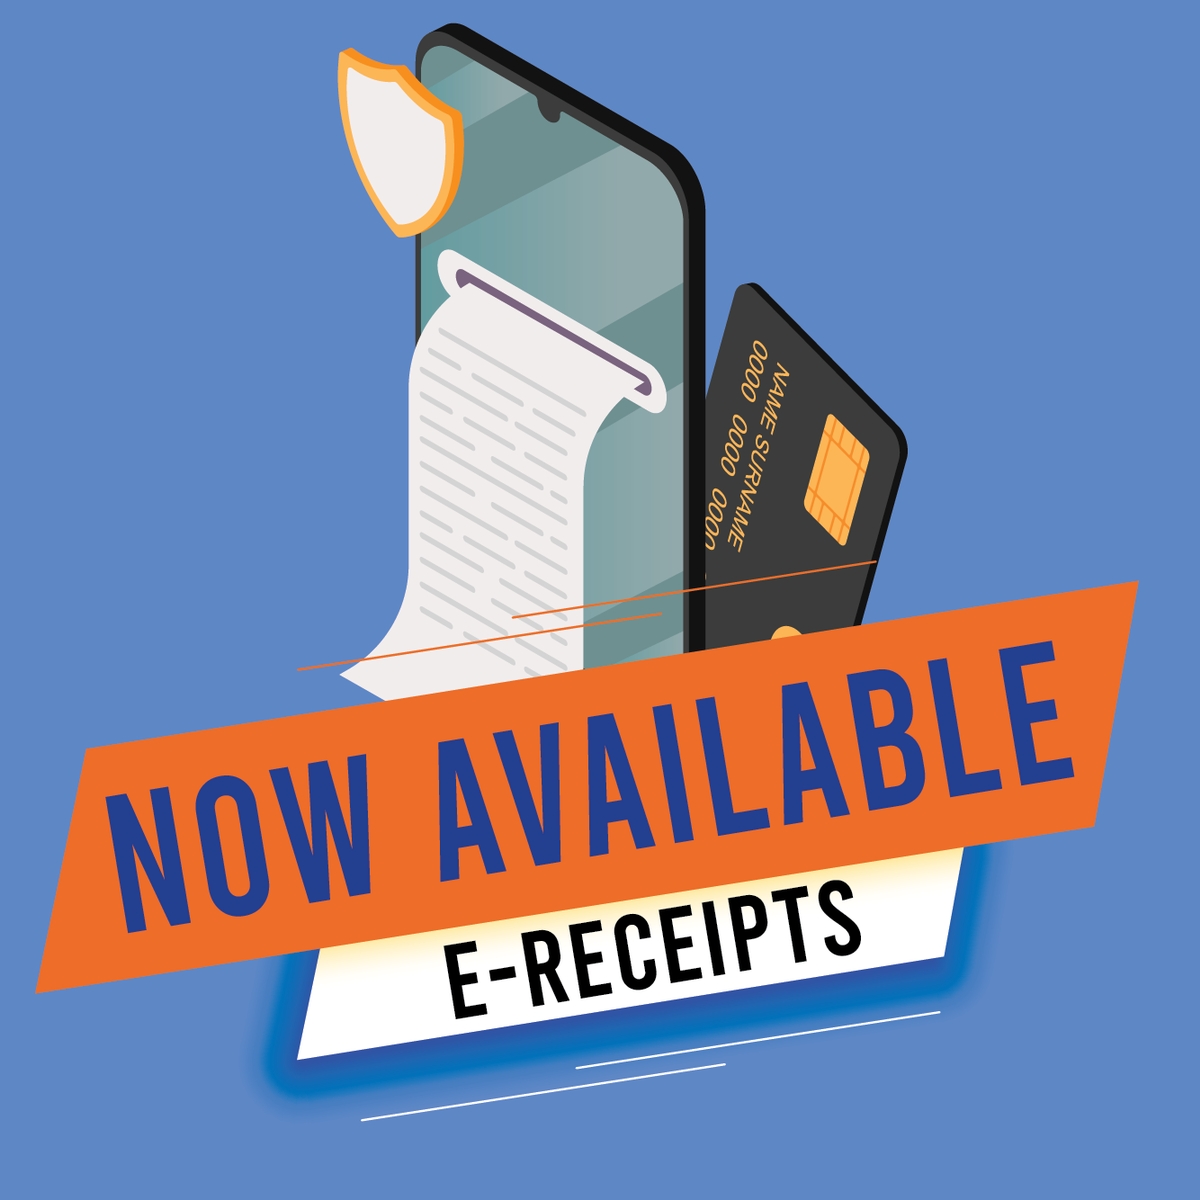 New E-Receipts Coming Soon!